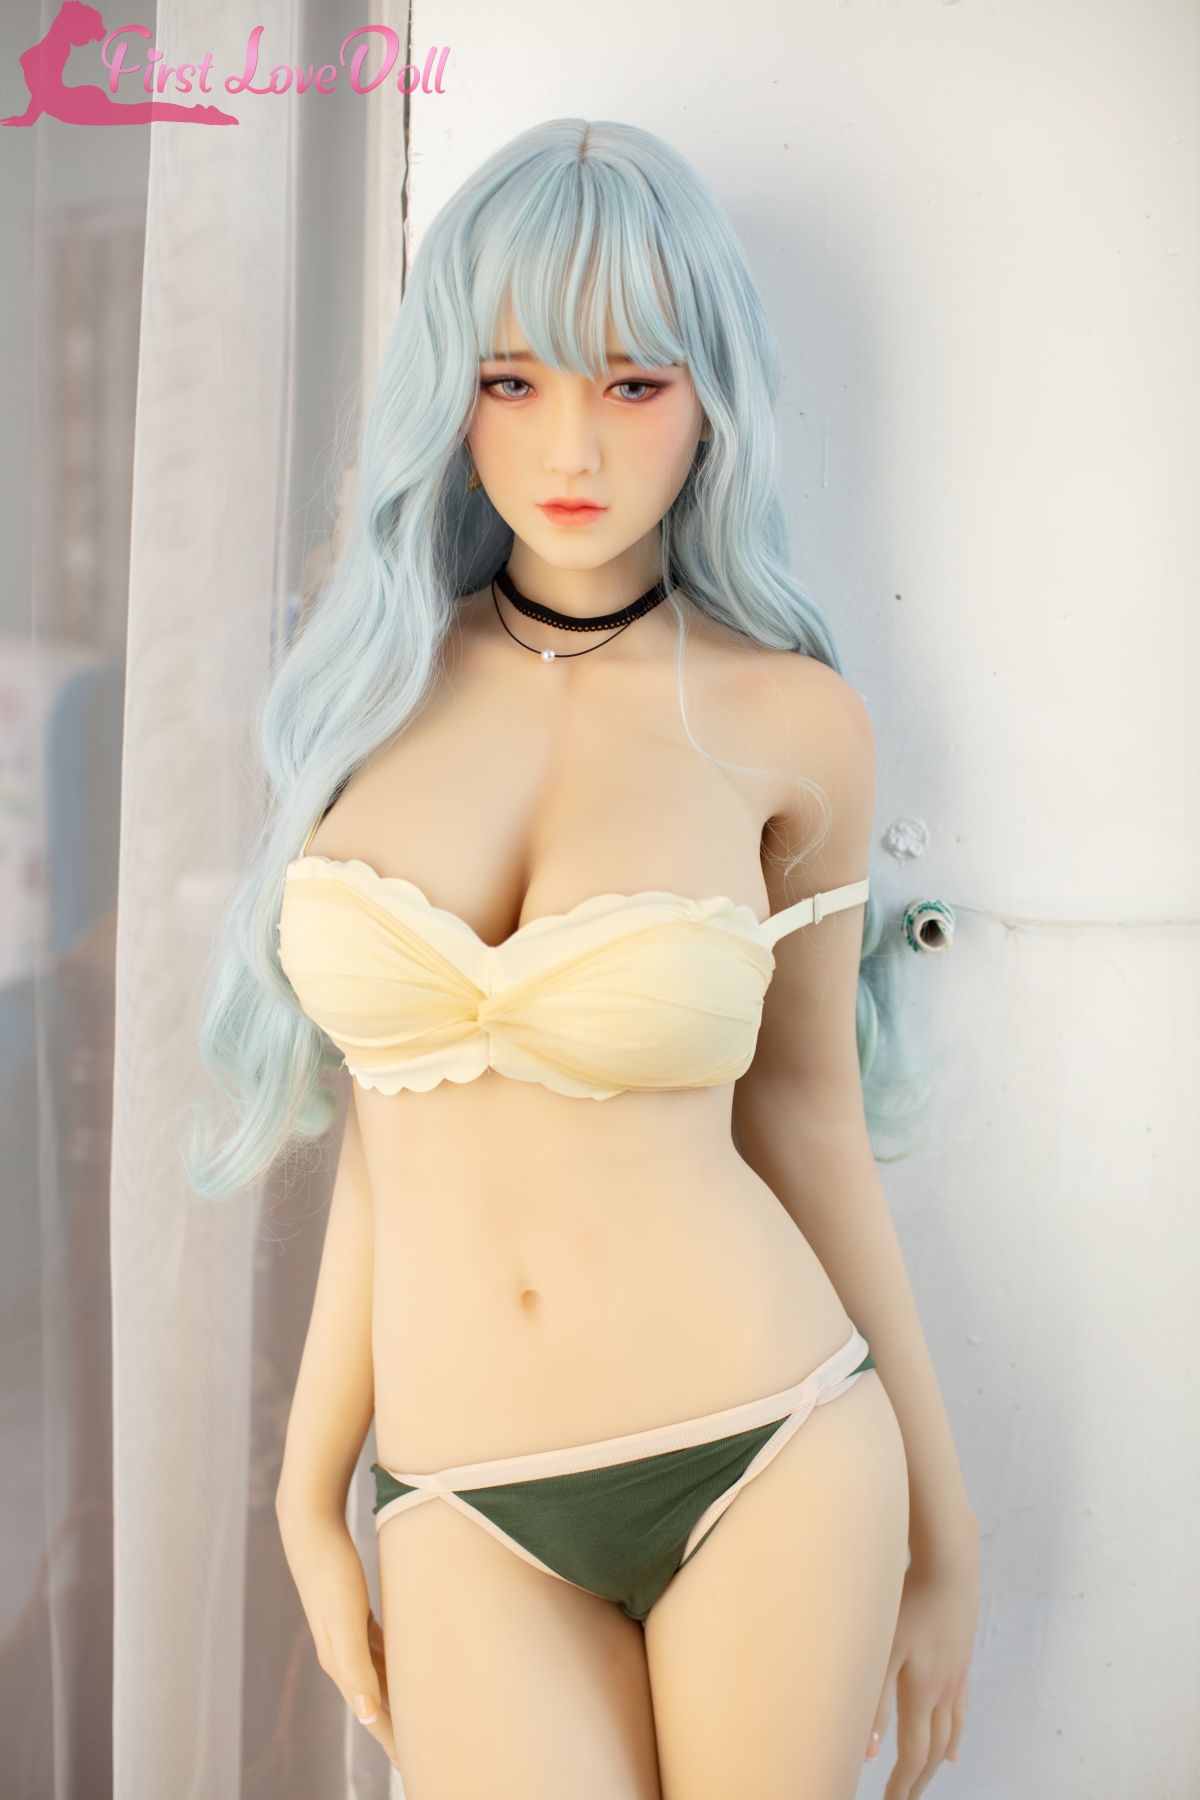 JX Doll | Sora- 5ft 2/158cm Japanese Style Pretty RealisticTPE Sex Doll (In Stock US)-First Love Doll